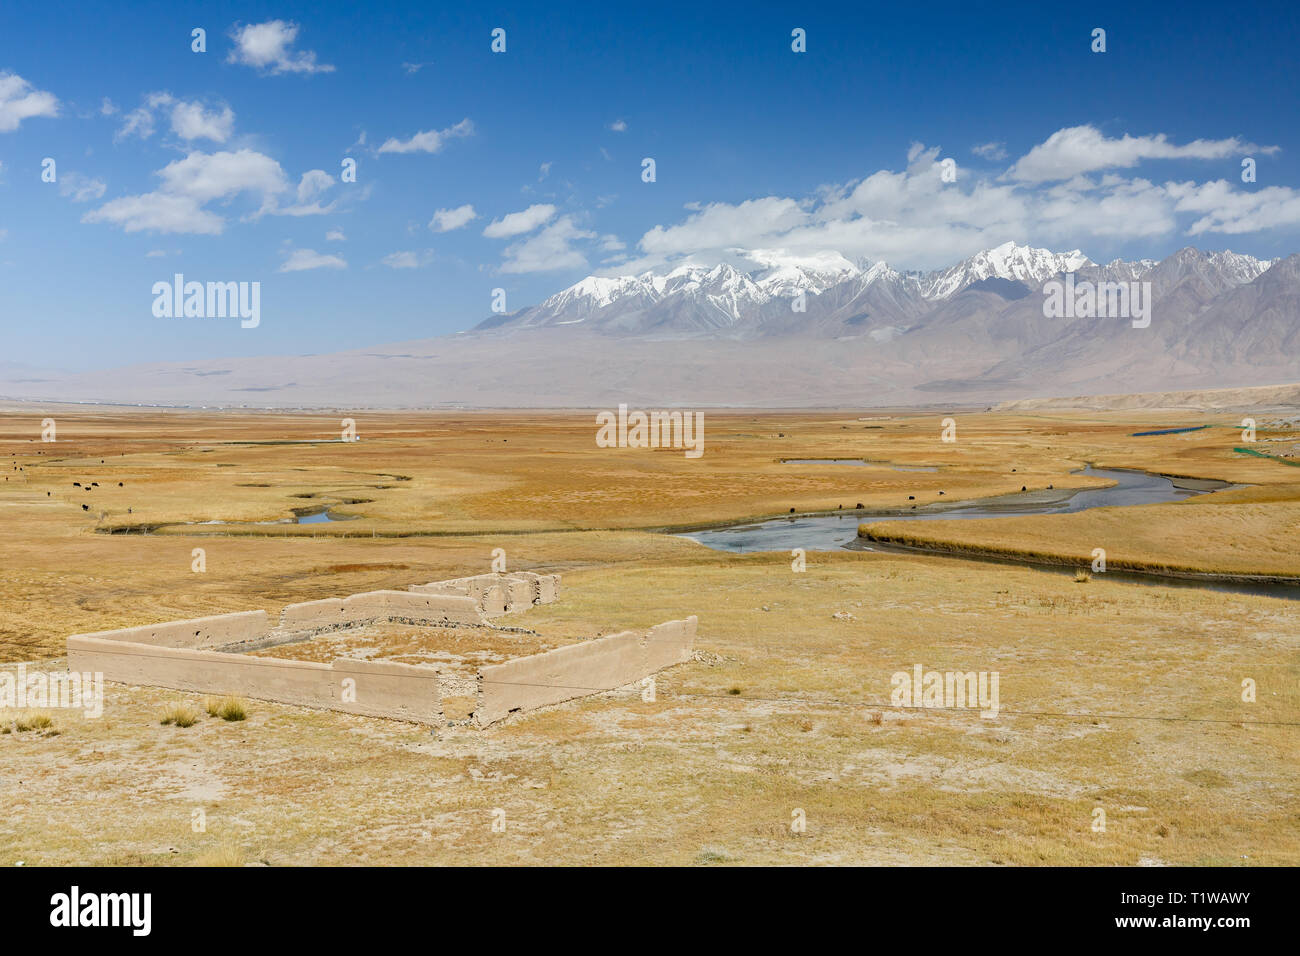 KARAKORUM HIGHWAY, XINJIANG / CHINA - October 3, 2017: View on Pamir Mountains - with a ruin, a river and yaks in the foreground (Karakorum Highway). Stock Photo